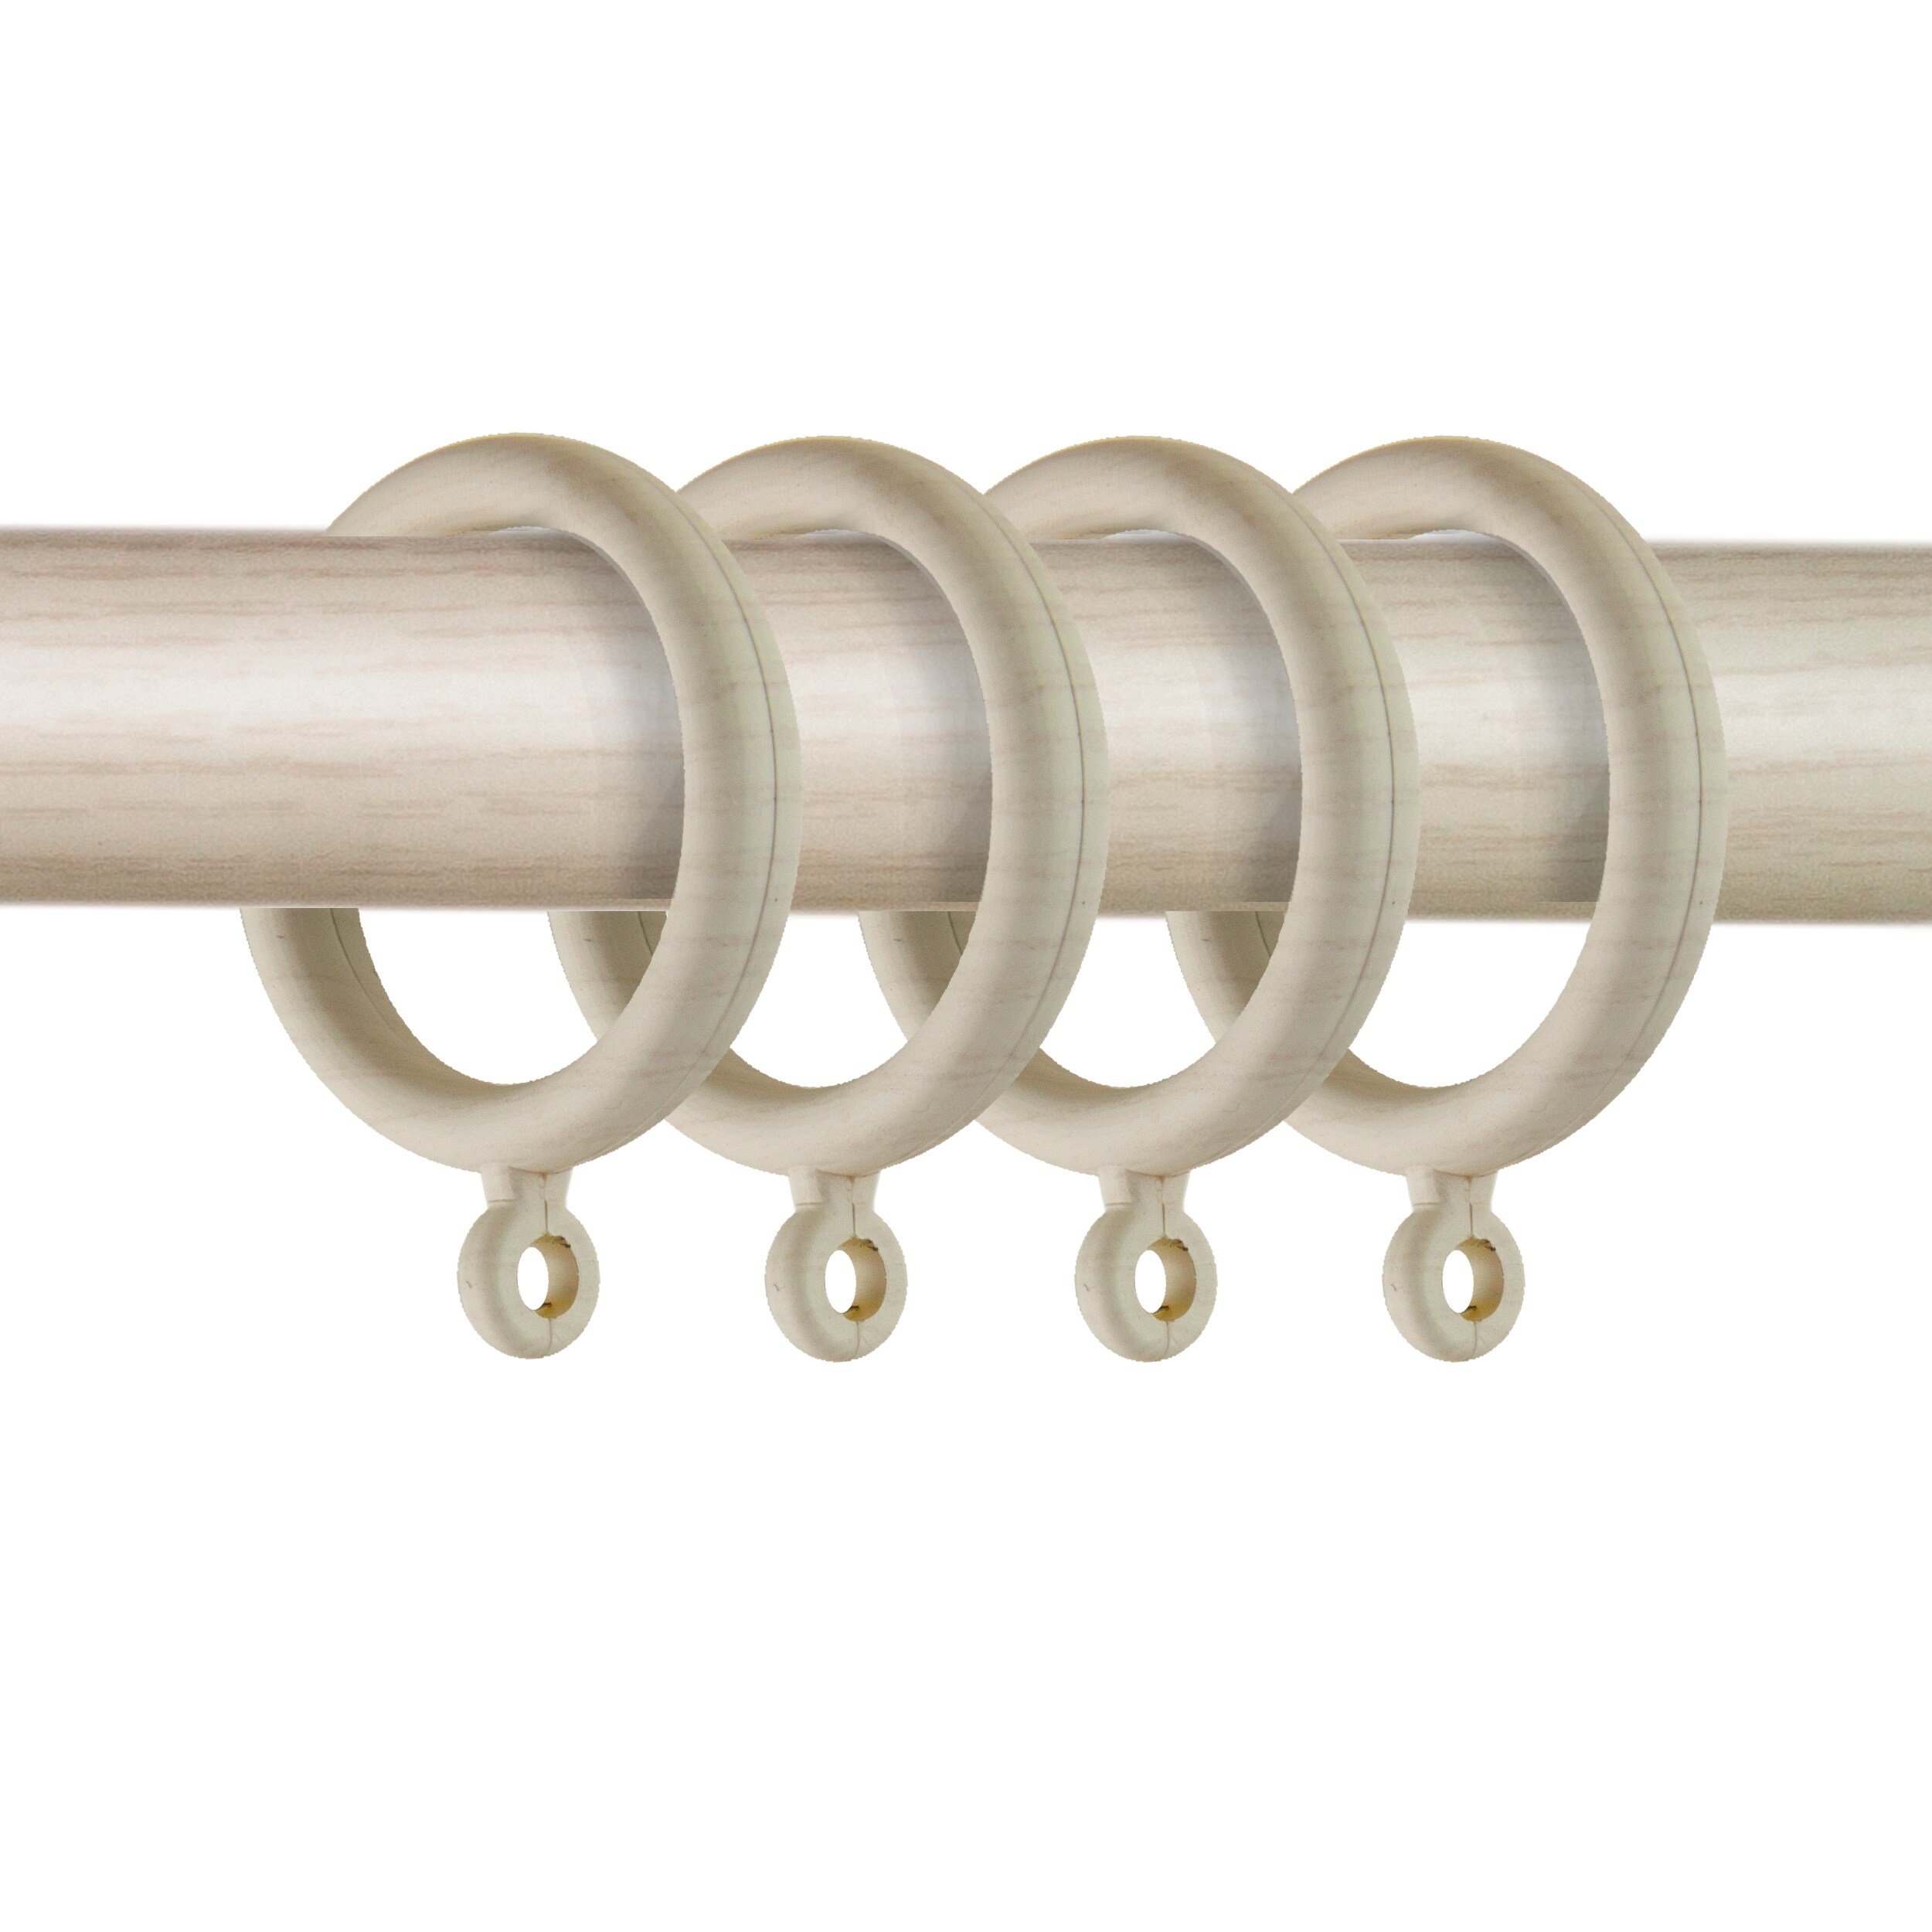 White Curtain Rod Pole Ring 28mm Diameter Rings Qty 6 